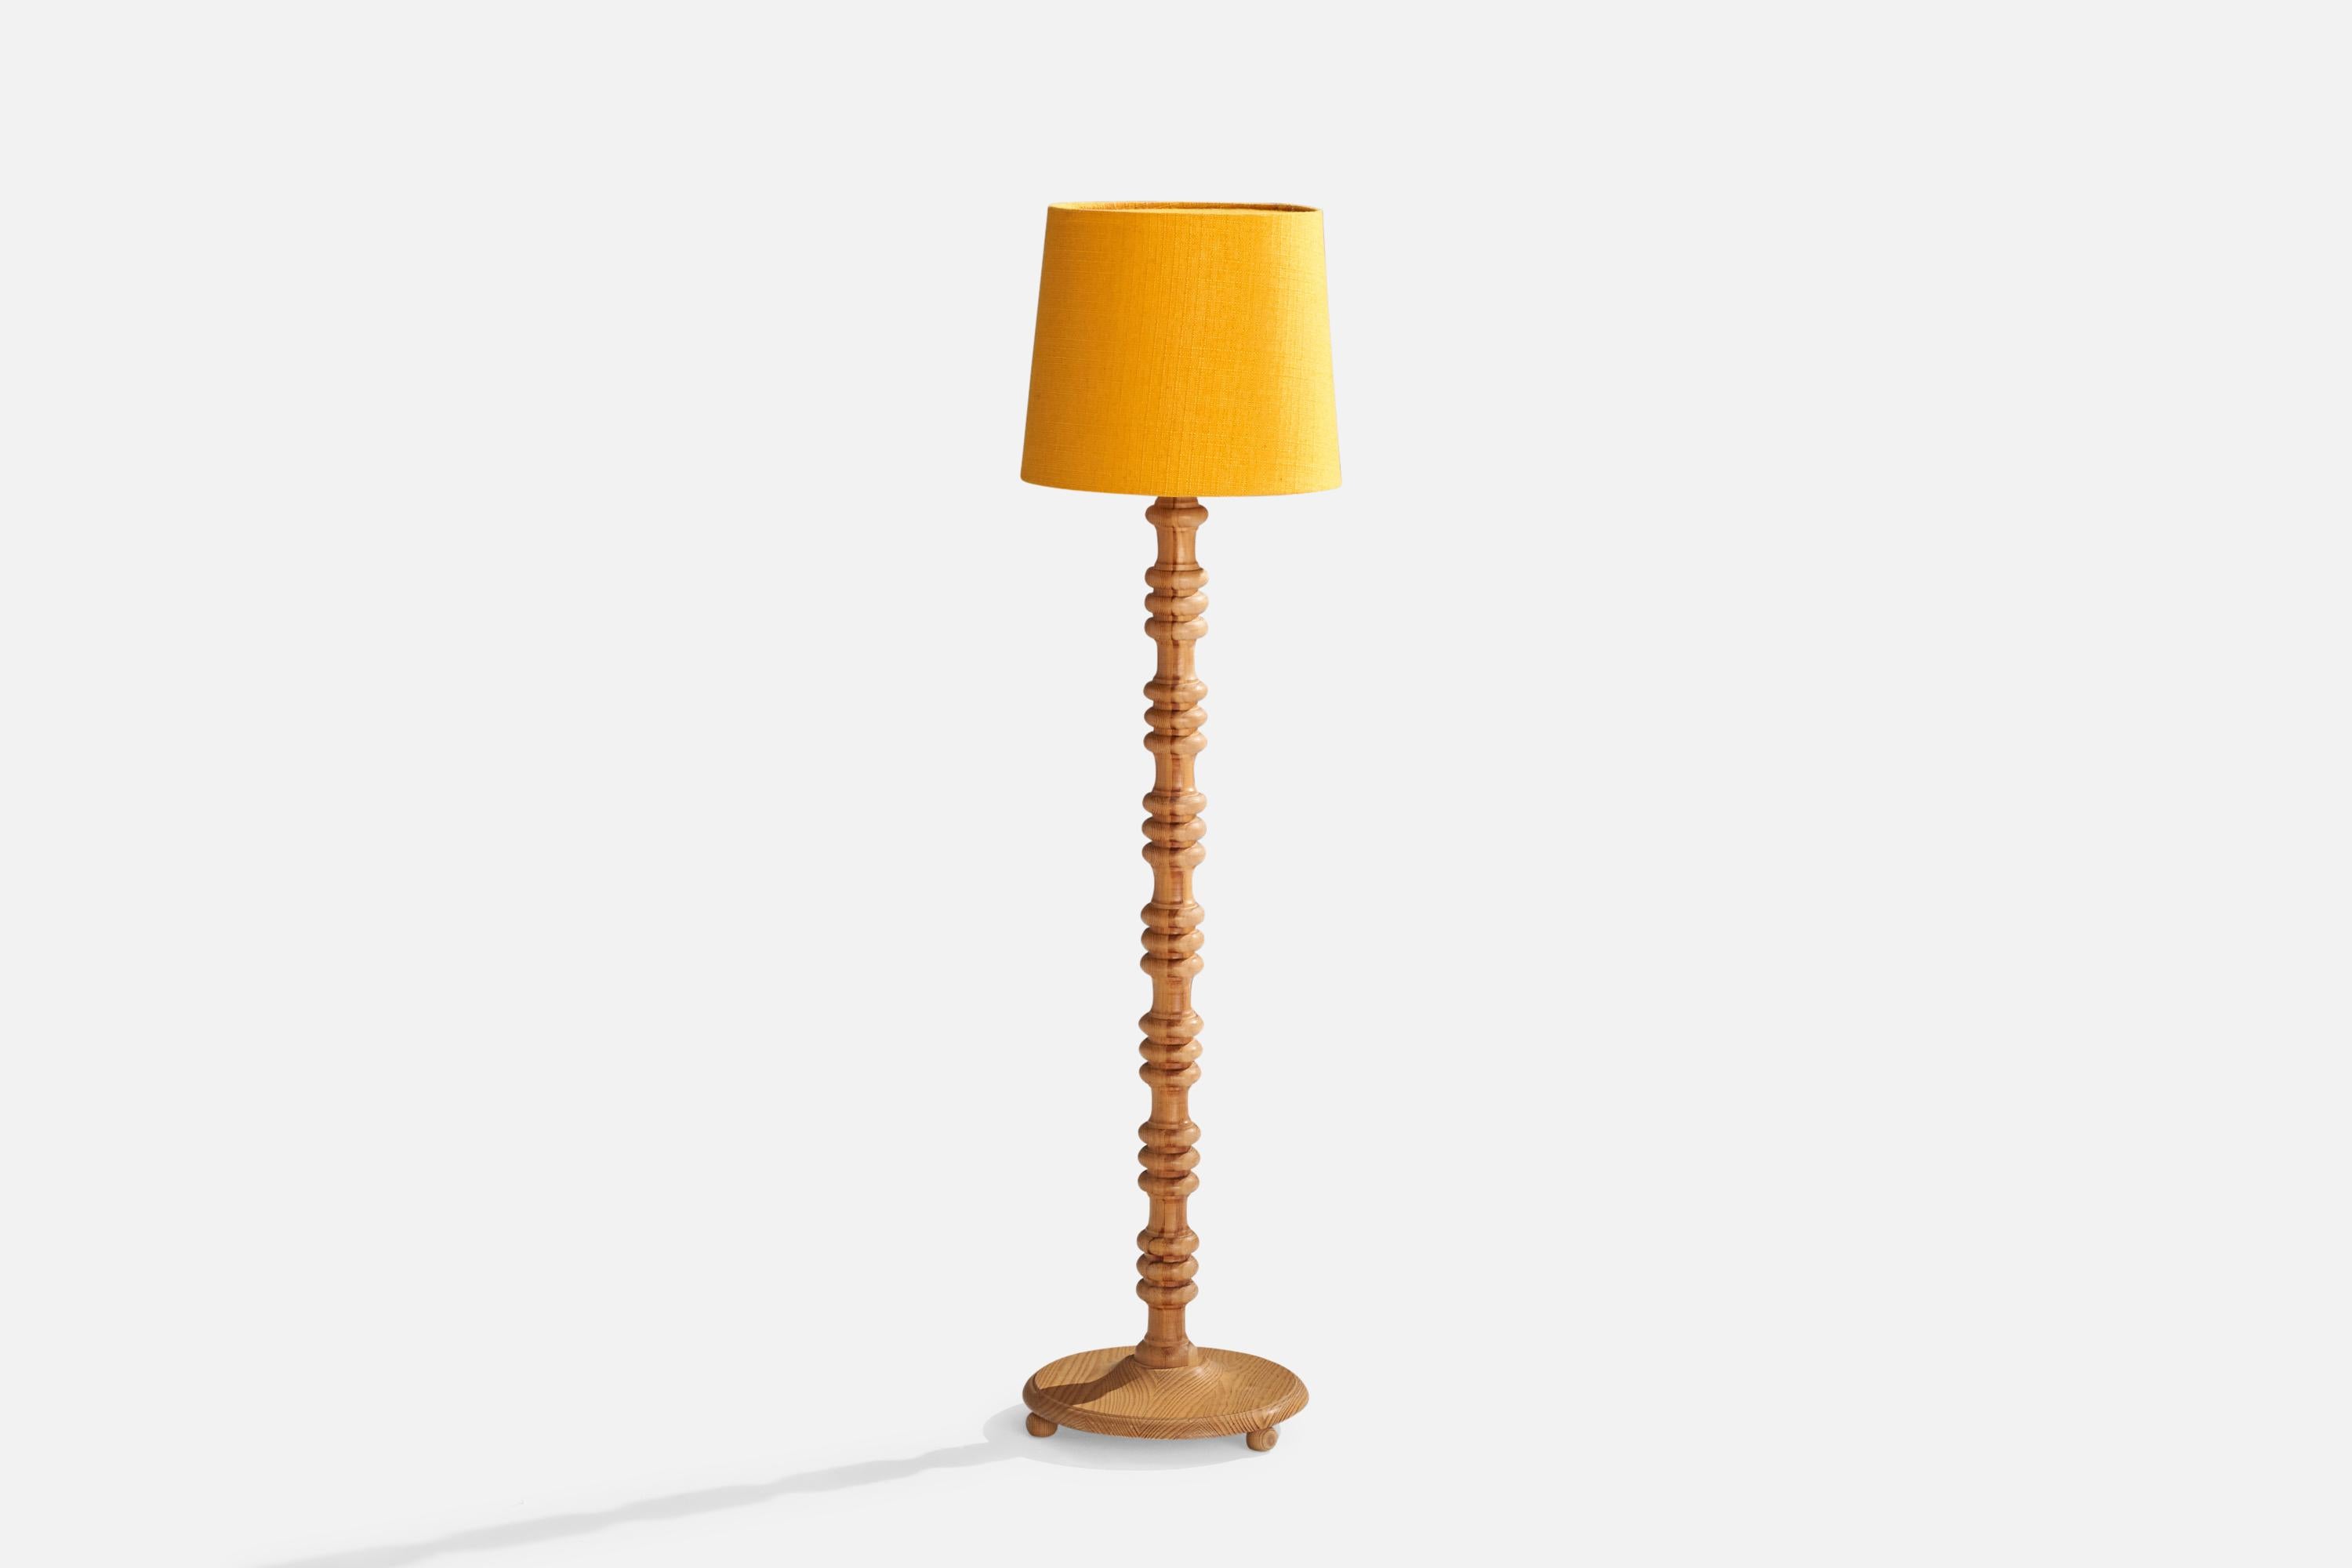 A pine and yellow fabric floor lamp designed and produced in Sweden, c. 1970s.
Overall Dimensions (inches): 49” H x 12.25” W x12.5” D
Stated dimensions include shade.
Bulb Specifications: E-26 Bulb
Number of Sockets: 1
All lighting will be converted